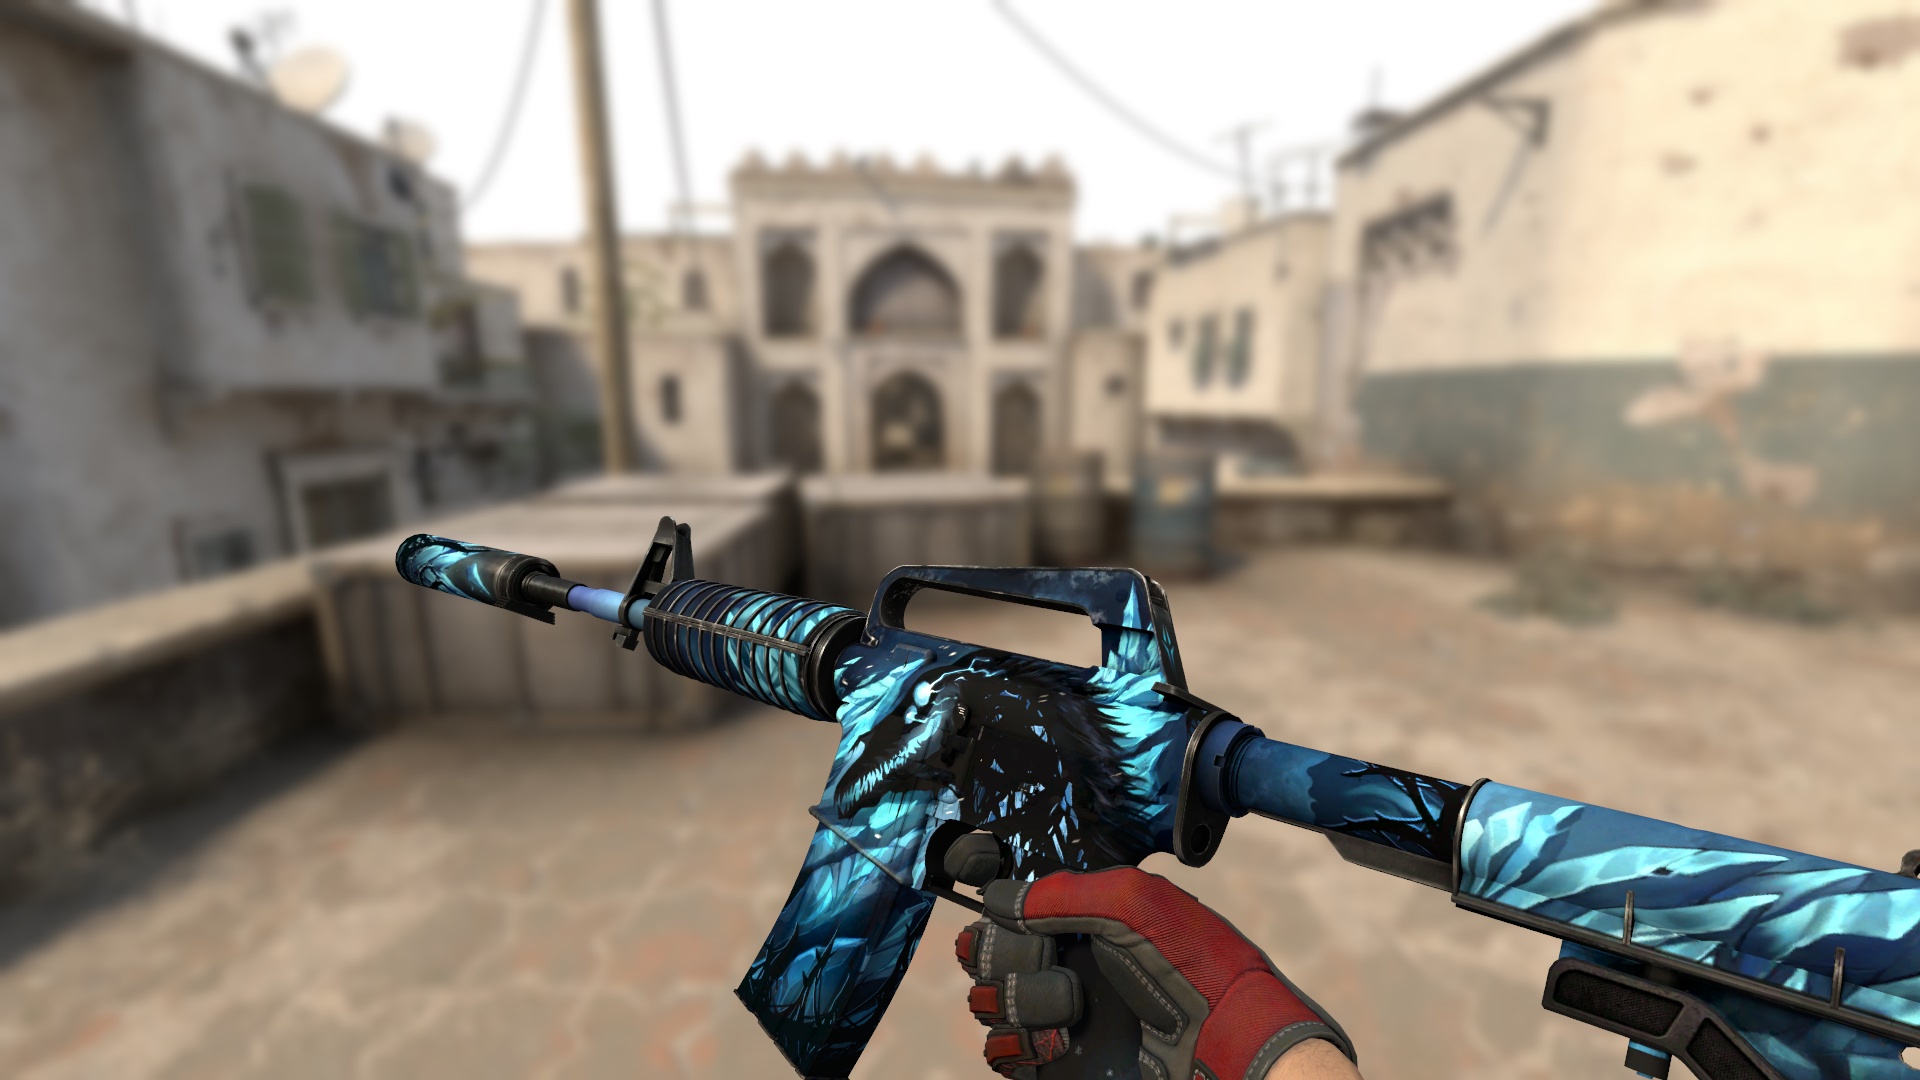 download the new for android Galil AR Signal cs go skin